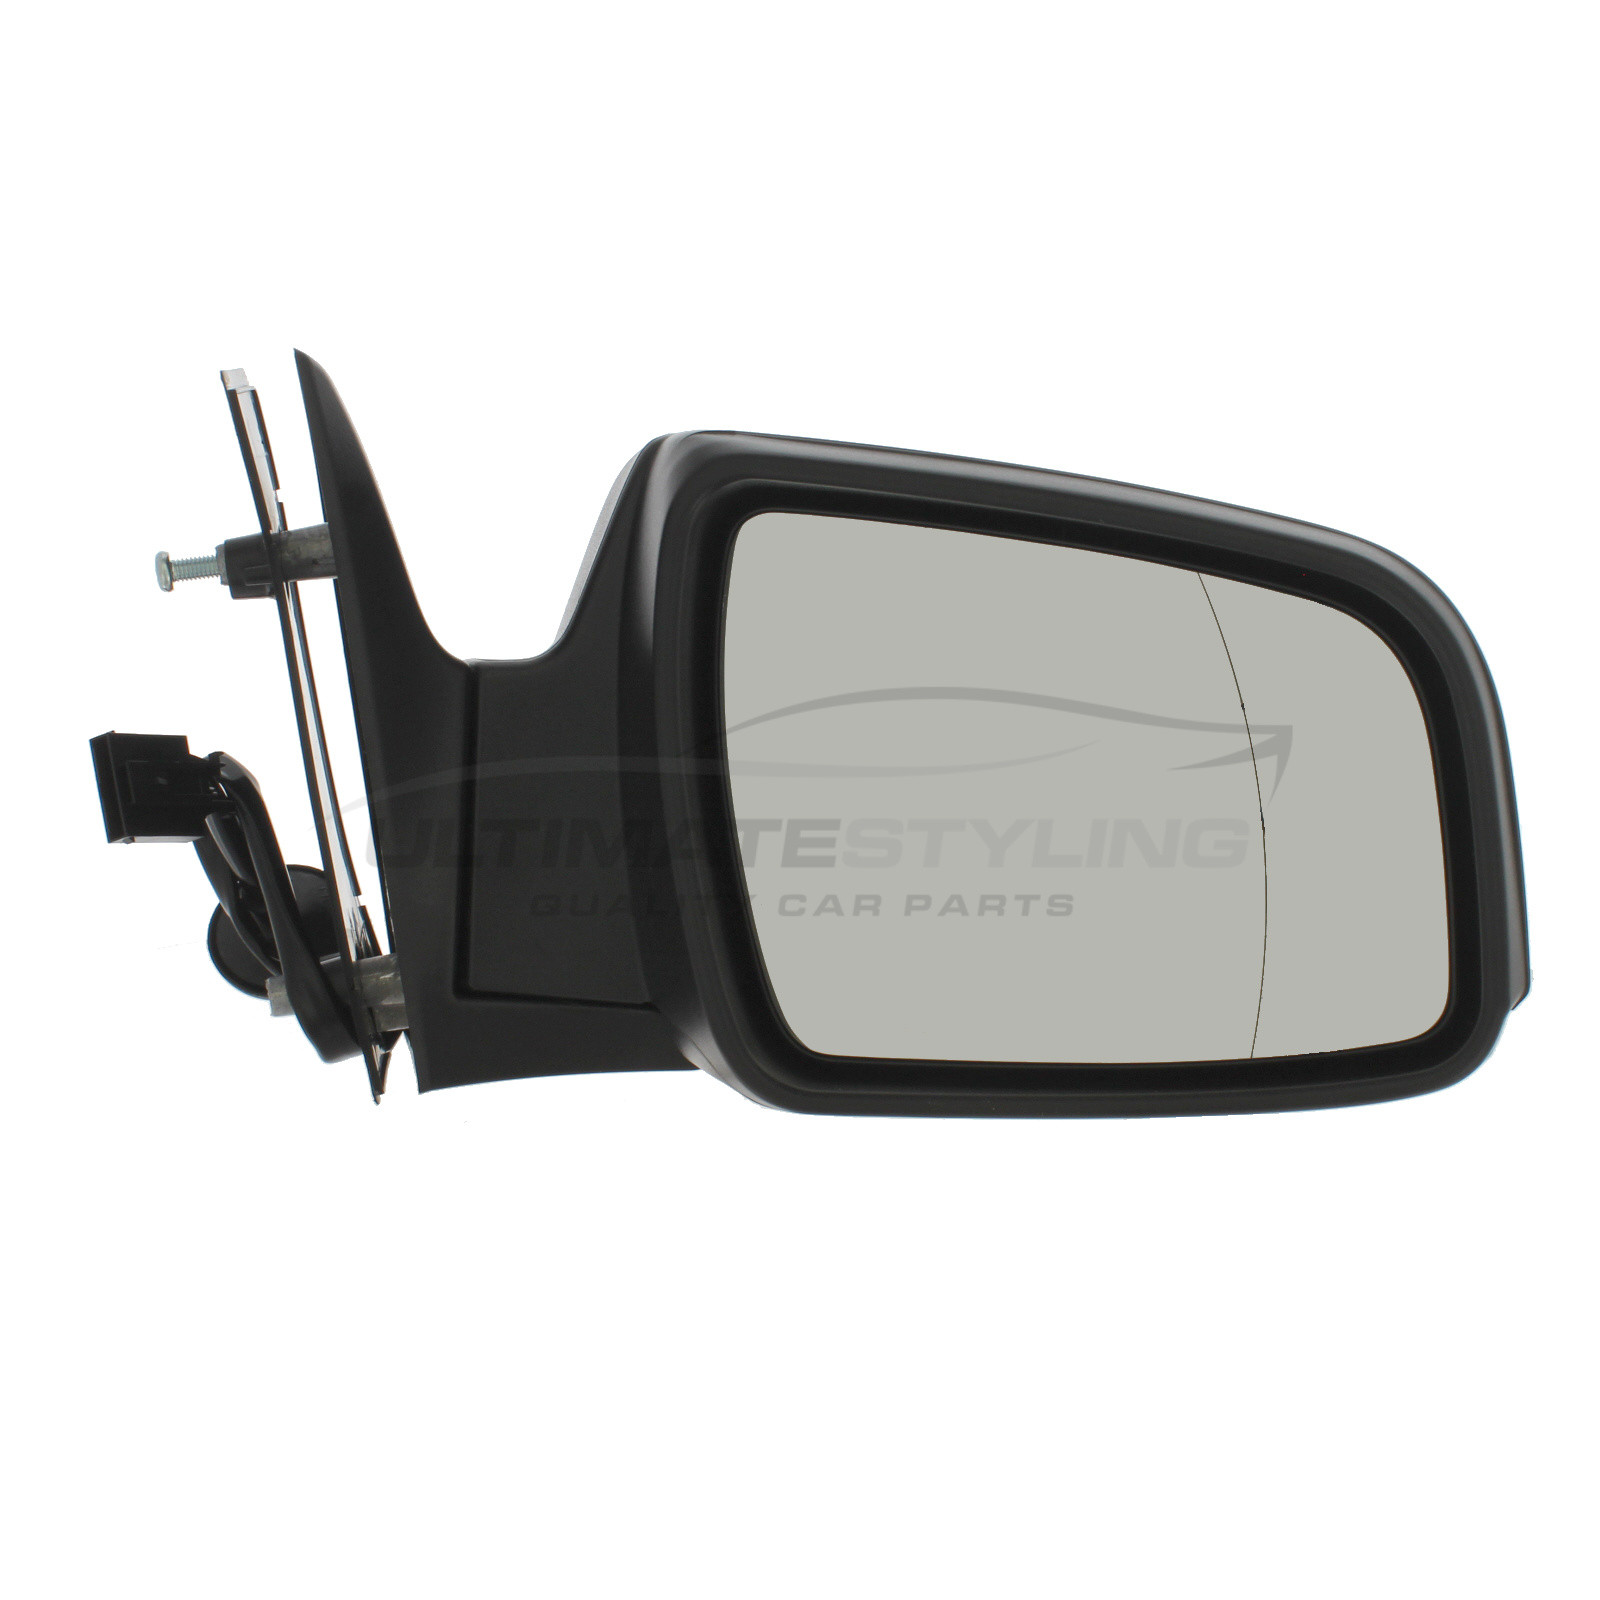 Replacement Right Side Wing Mirror Heated Vauxhall Zafira 2.0 Turbo VXR 05-13